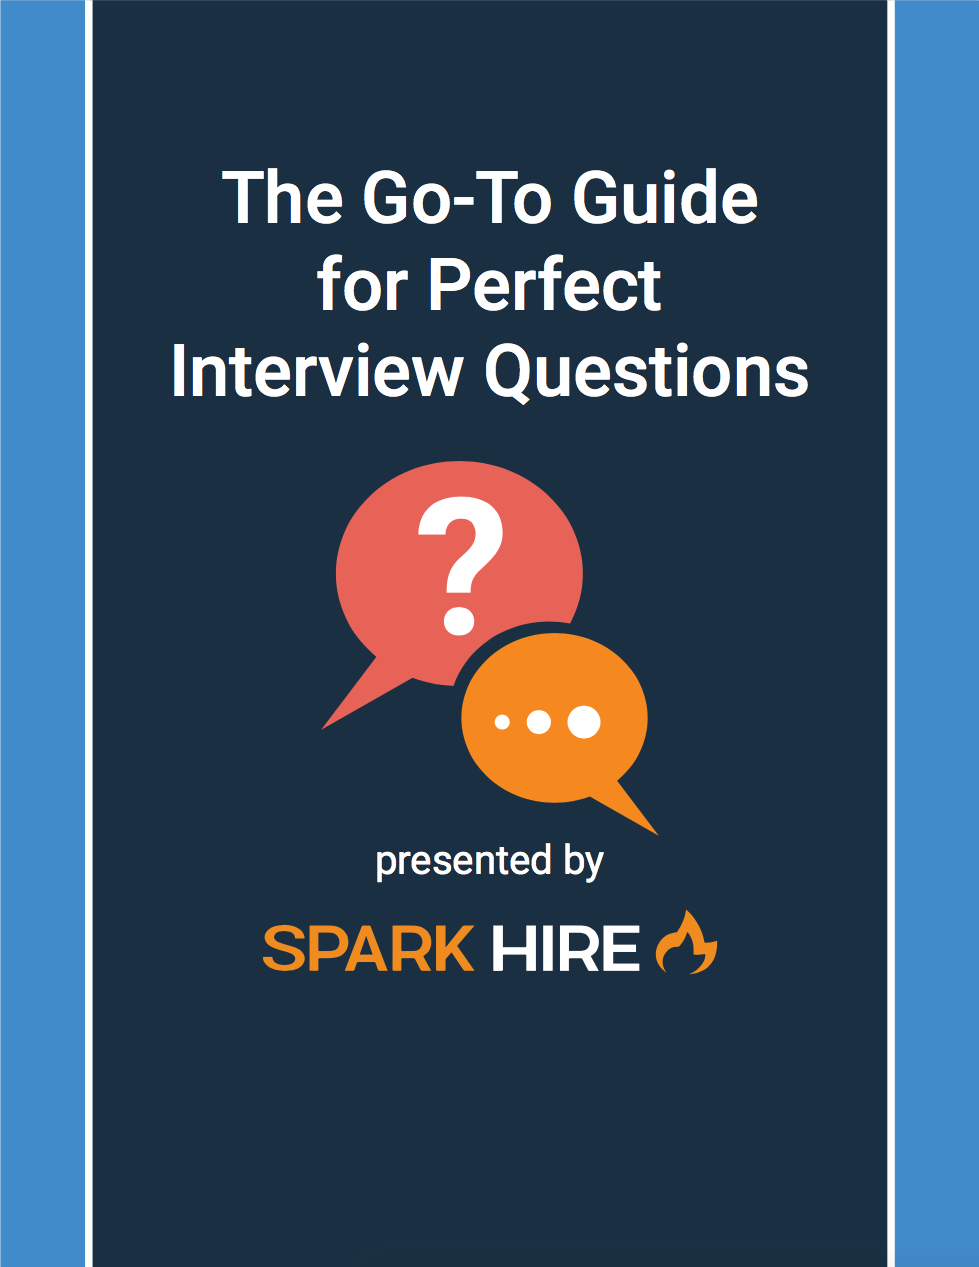 The Go-To Guide for Perfect Interview Questions